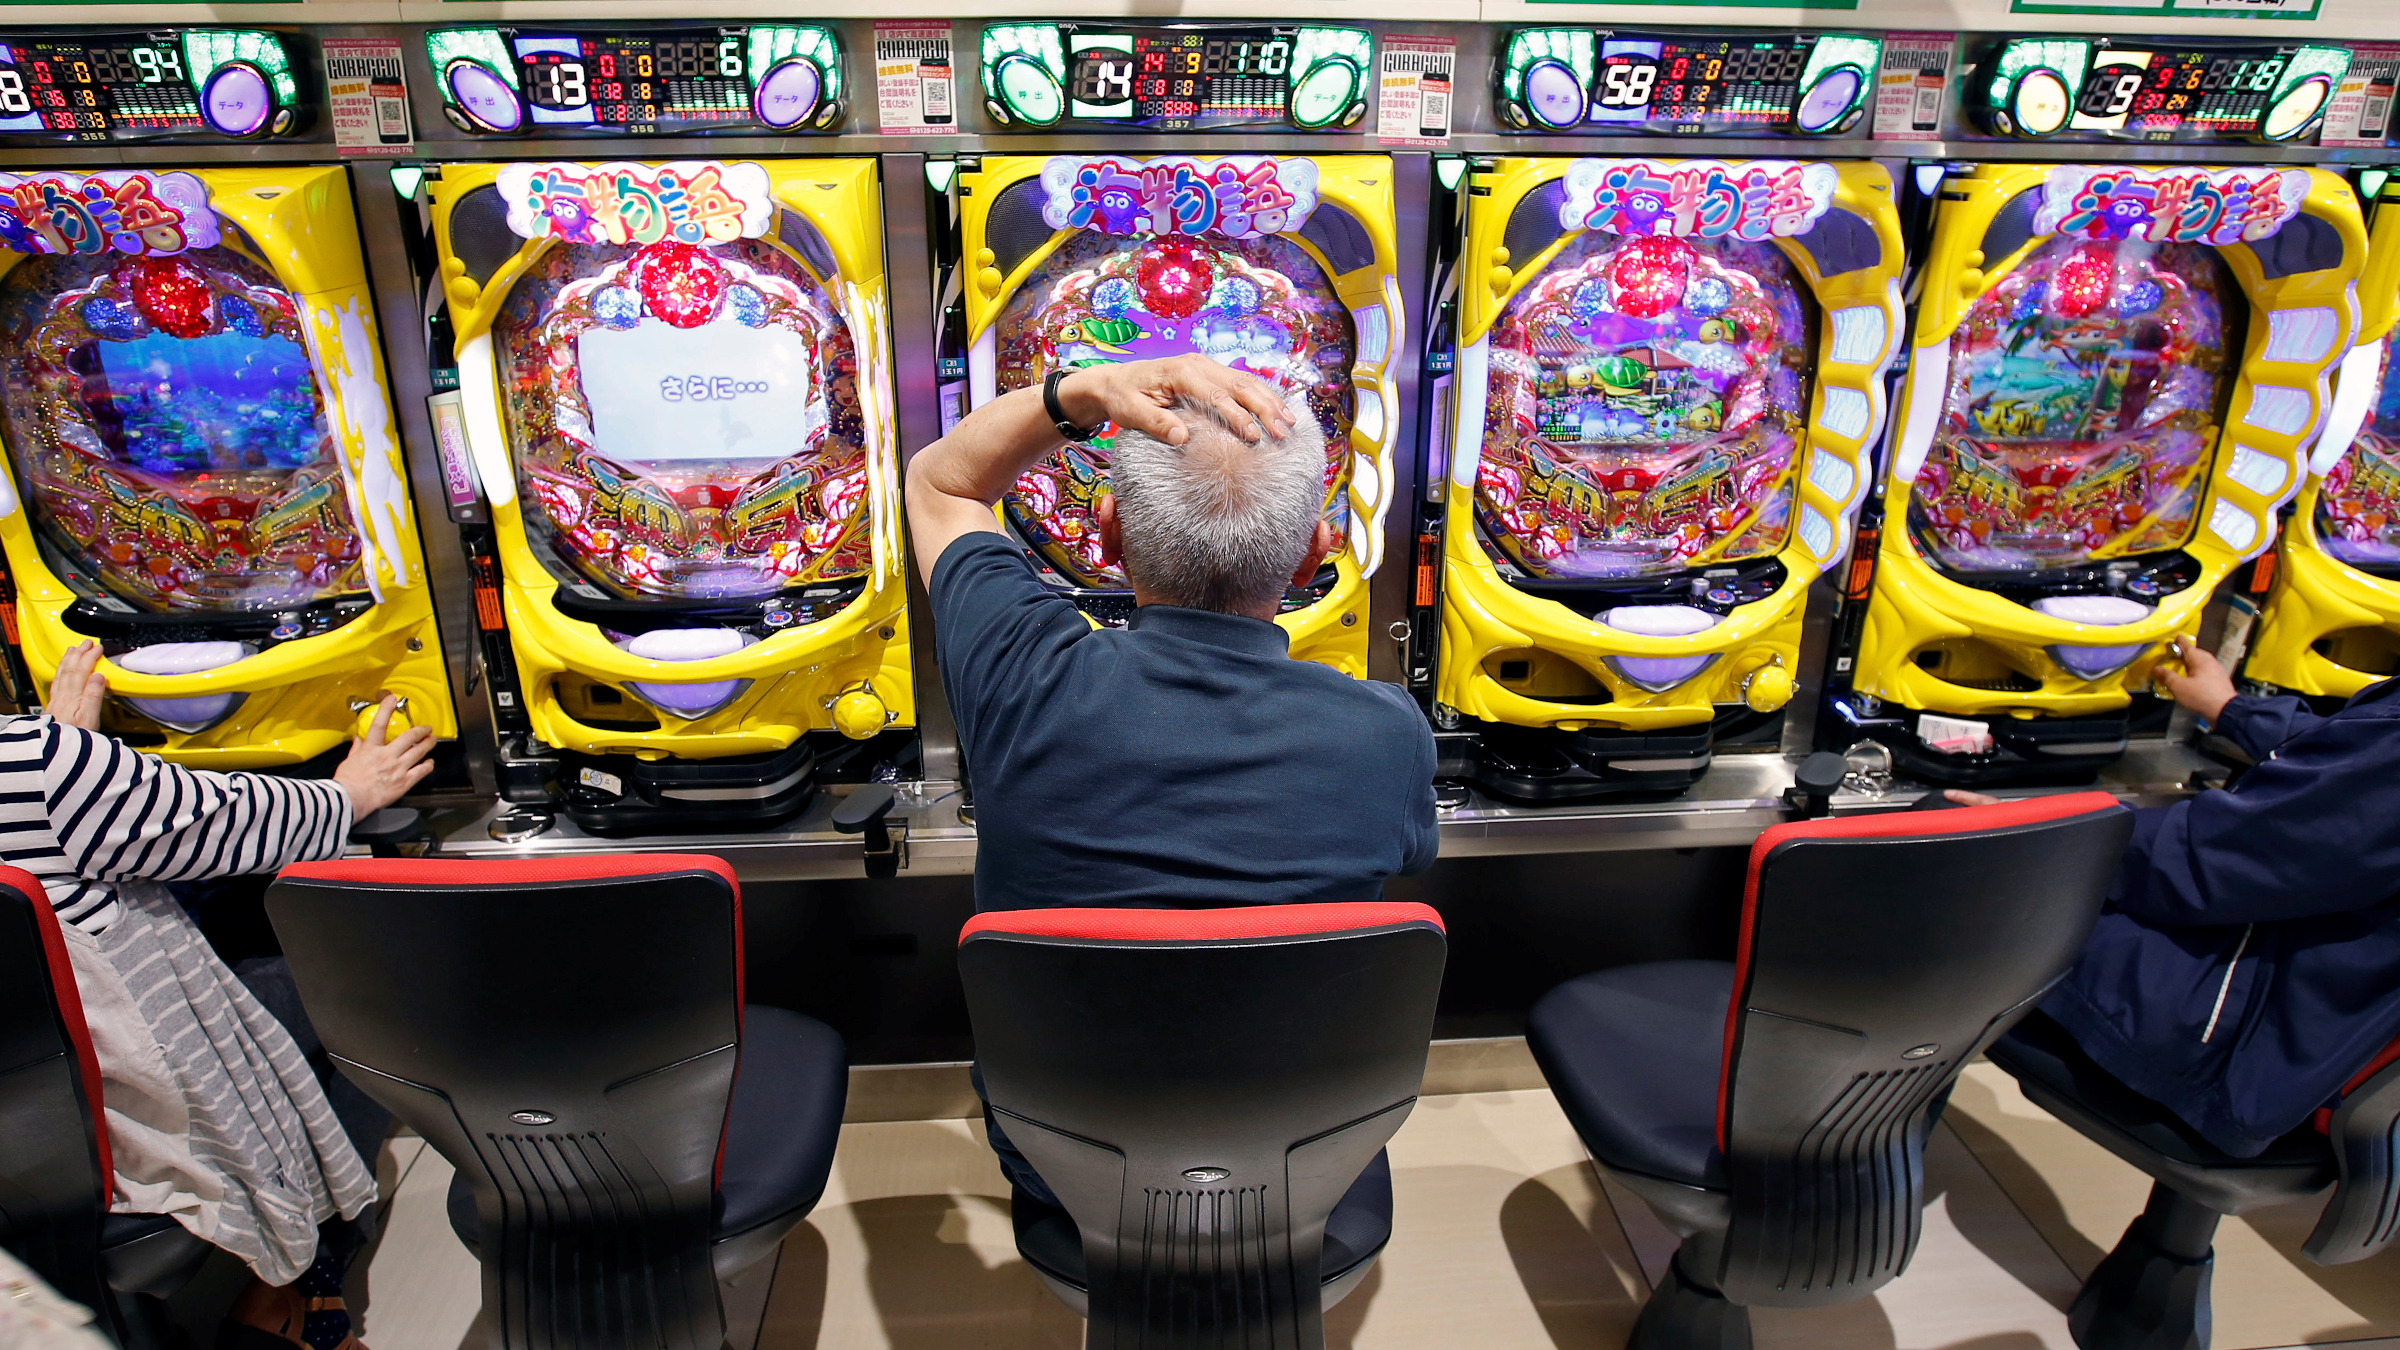 visitors-play-pachinko-a-japanese-form-of-legal-gambling-at-a-pachinko-parlour-in-fukushima